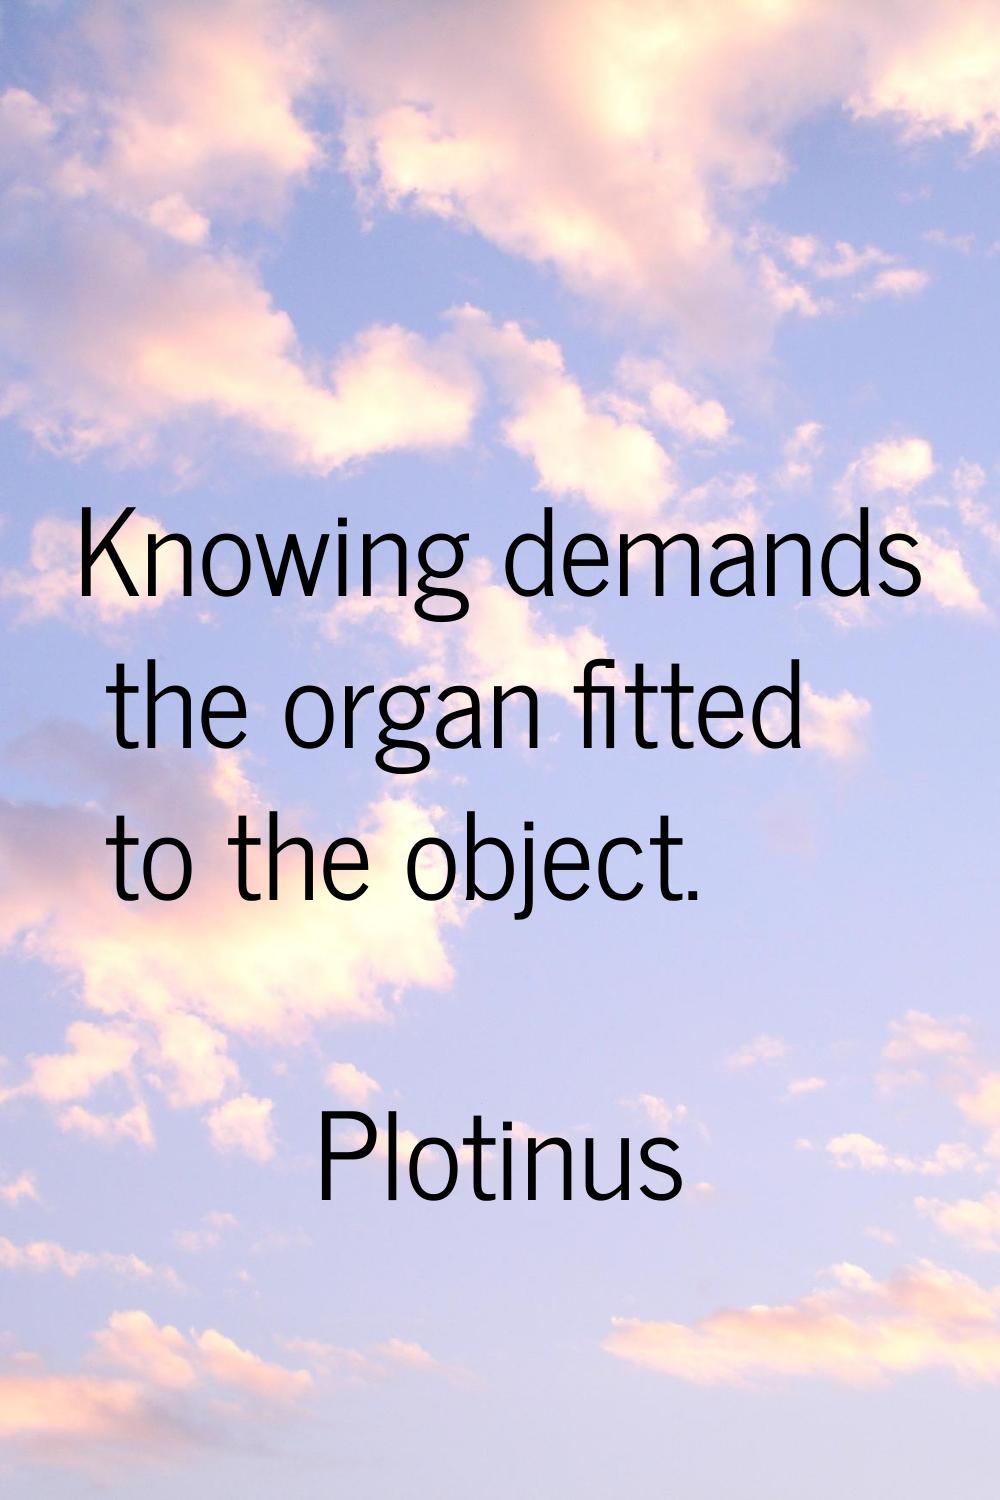 Knowing demands the organ fitted to the object.